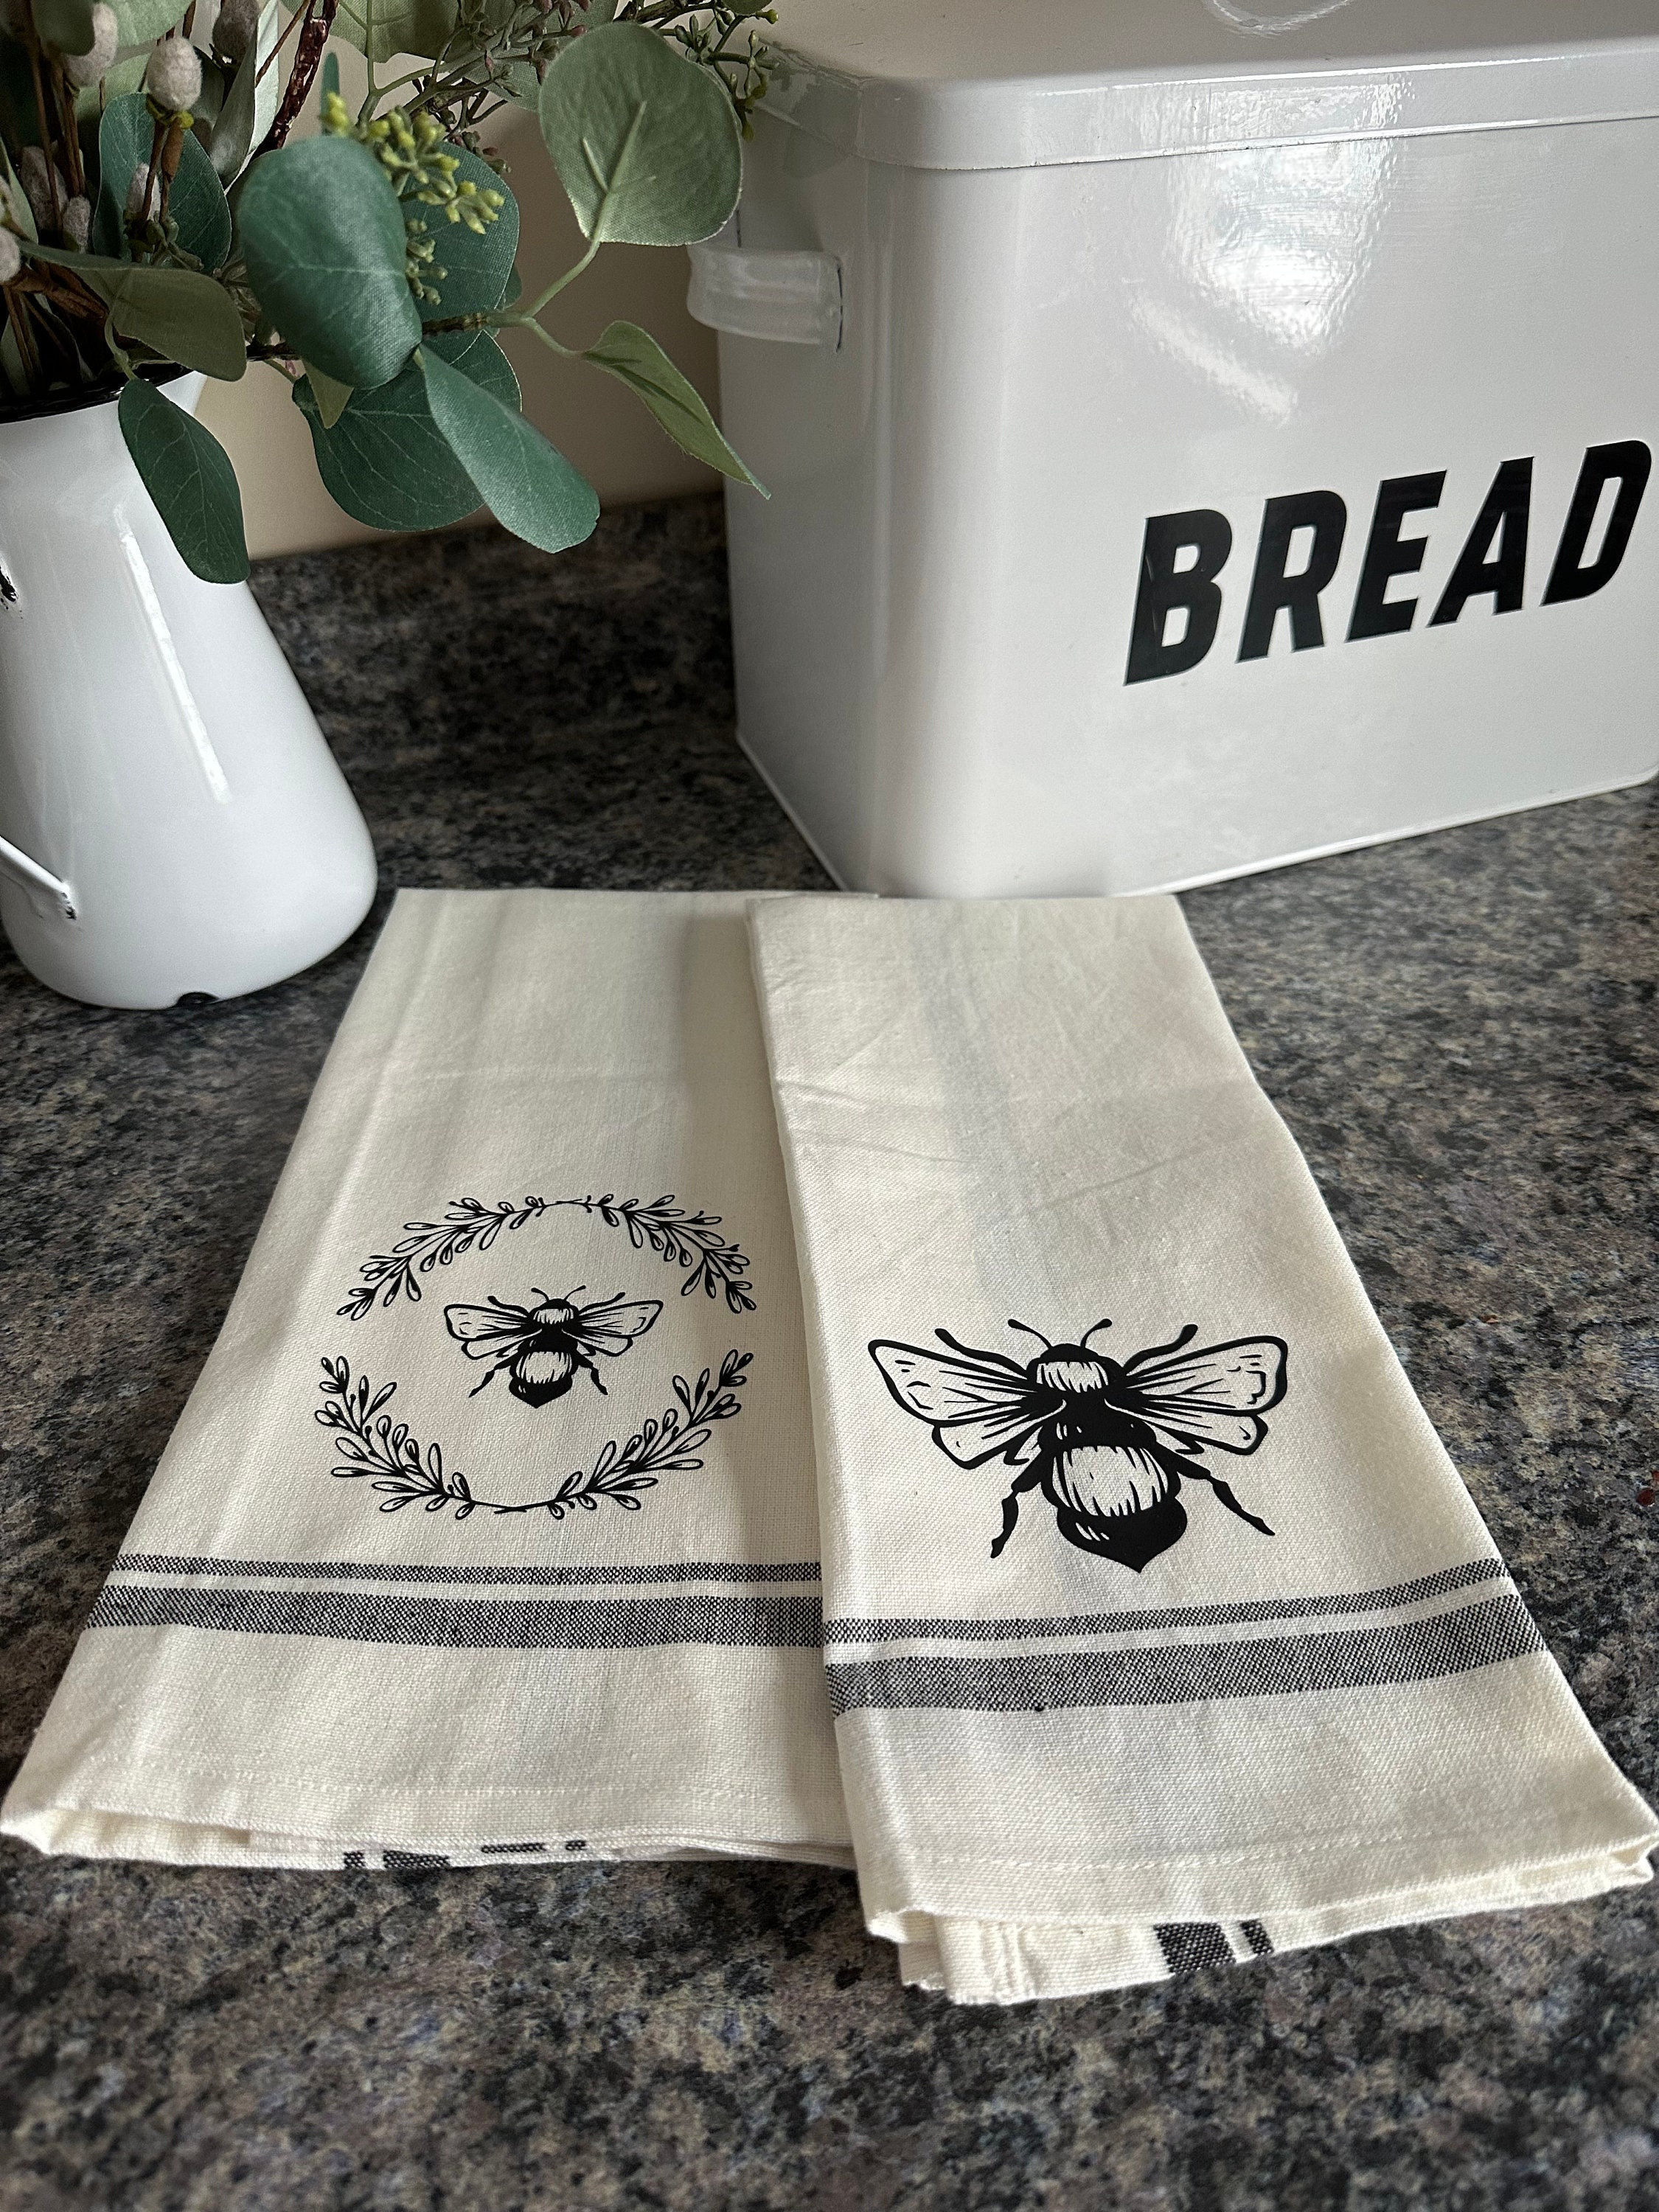 Farmhouse Kitchen Tea Towel Set of 4 19x28 Embroidered Bee Creme Grey – VHC  Brands Home Decor